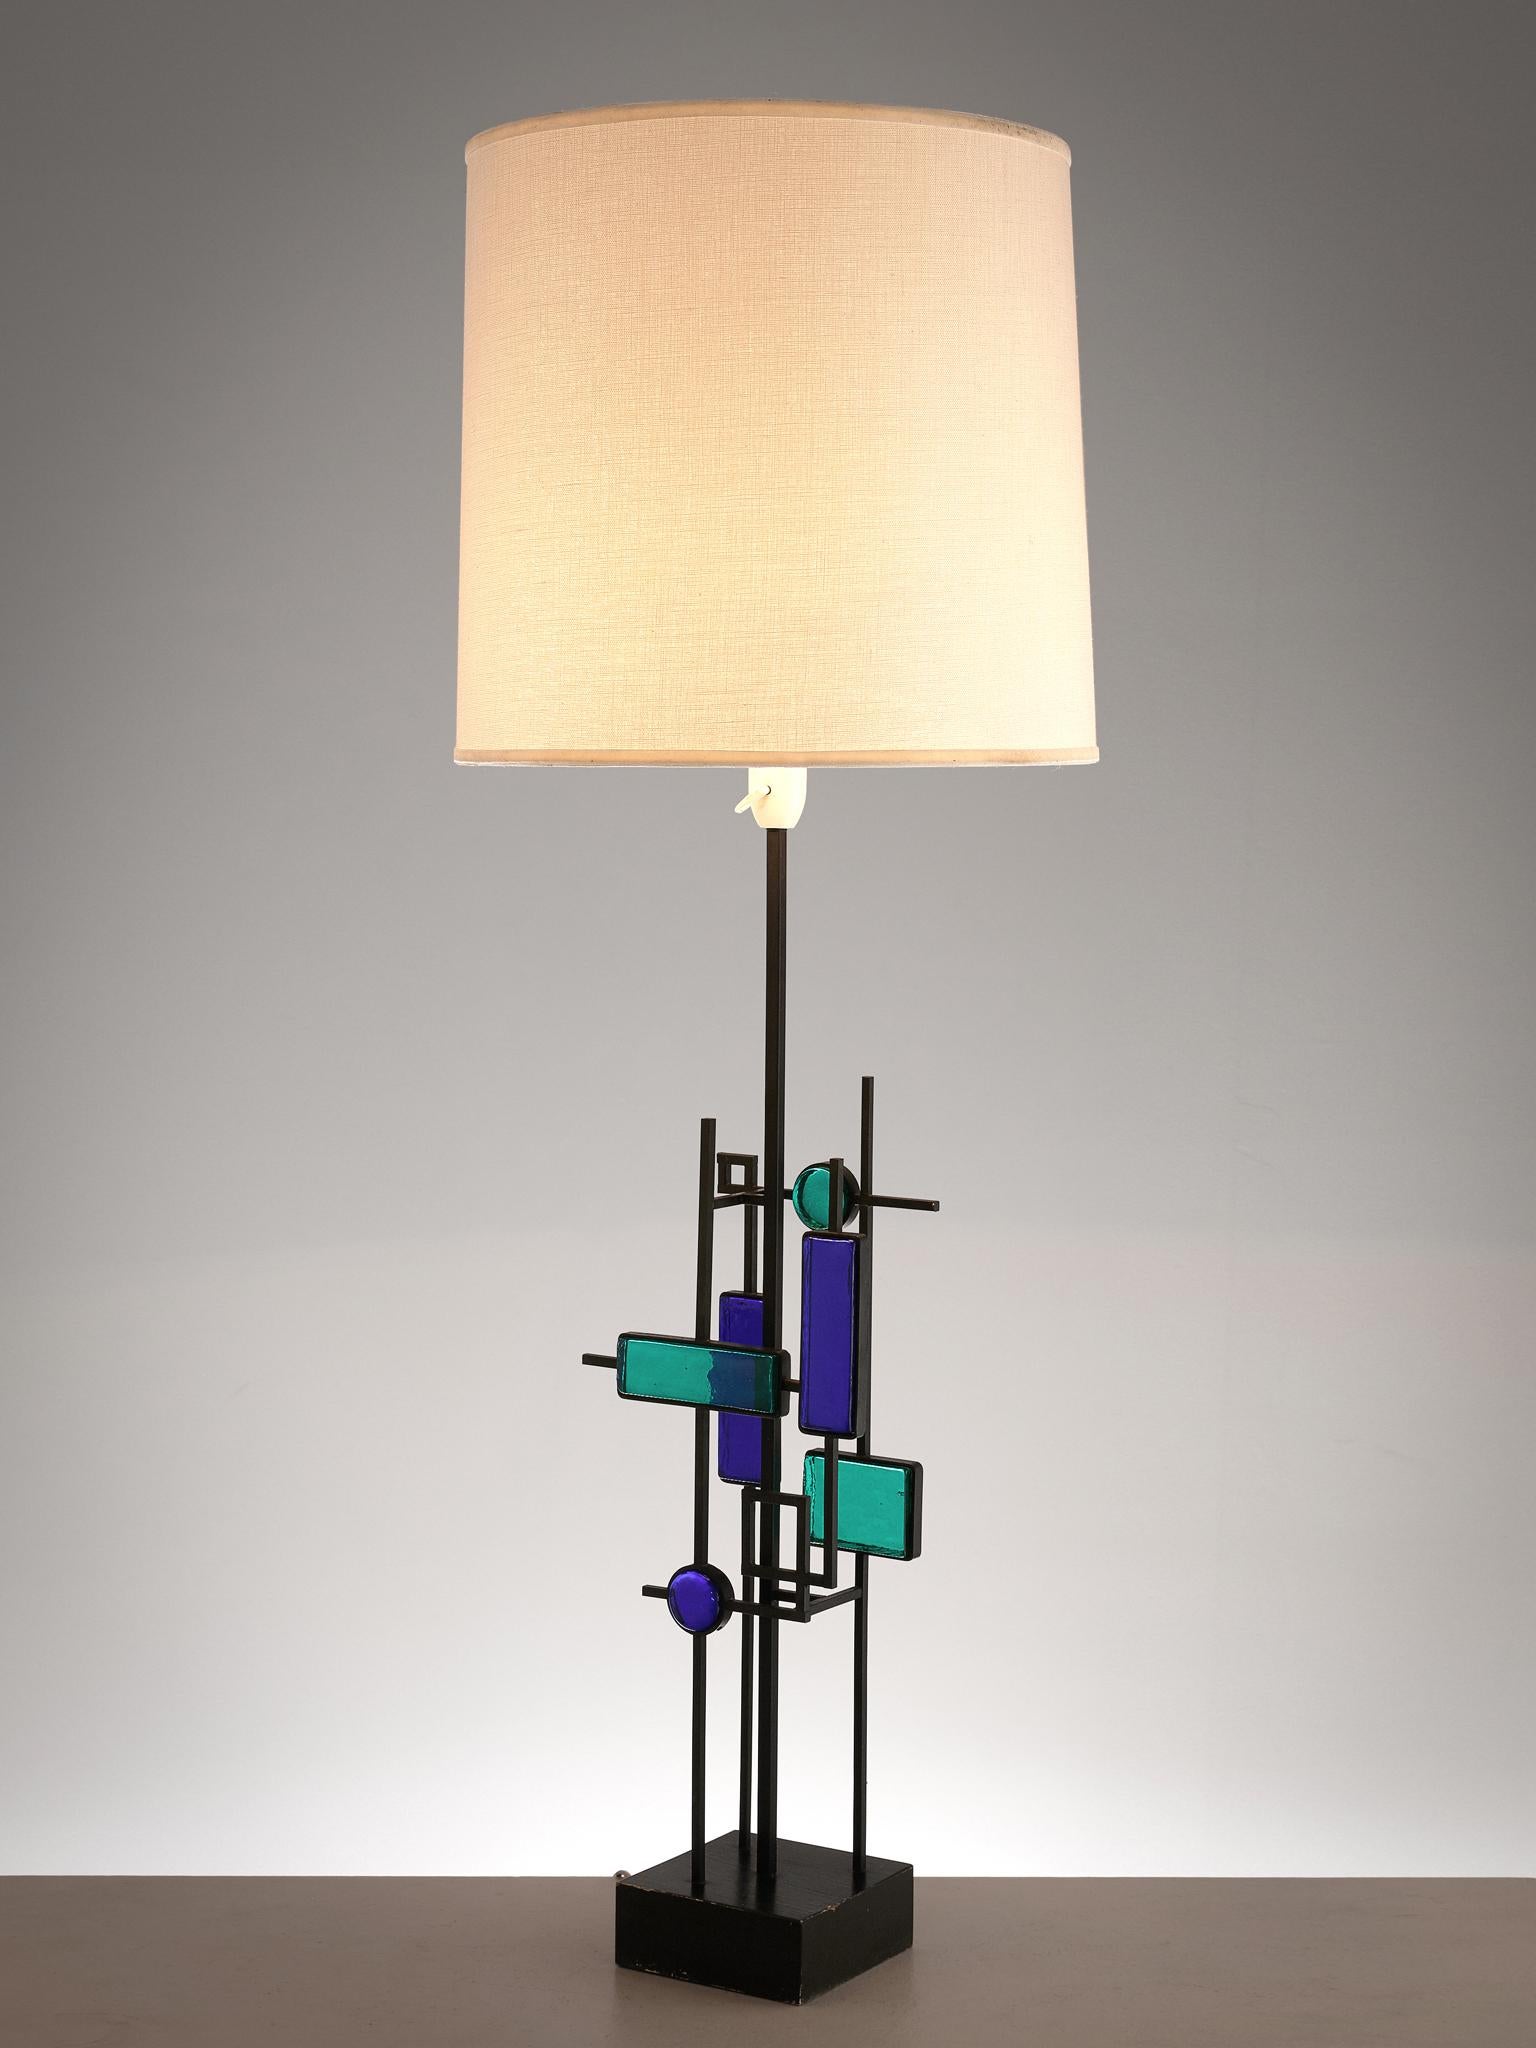 Svend Aage Holm Sørensen, table lamp, iron, wood and glass, Sweden, 1960s

A Brutalist table lamp by the Swedish Holm Sørensen, featuring an iron frame that holds several squares of glass in turquoise and blue. Above the glass shapes is the light